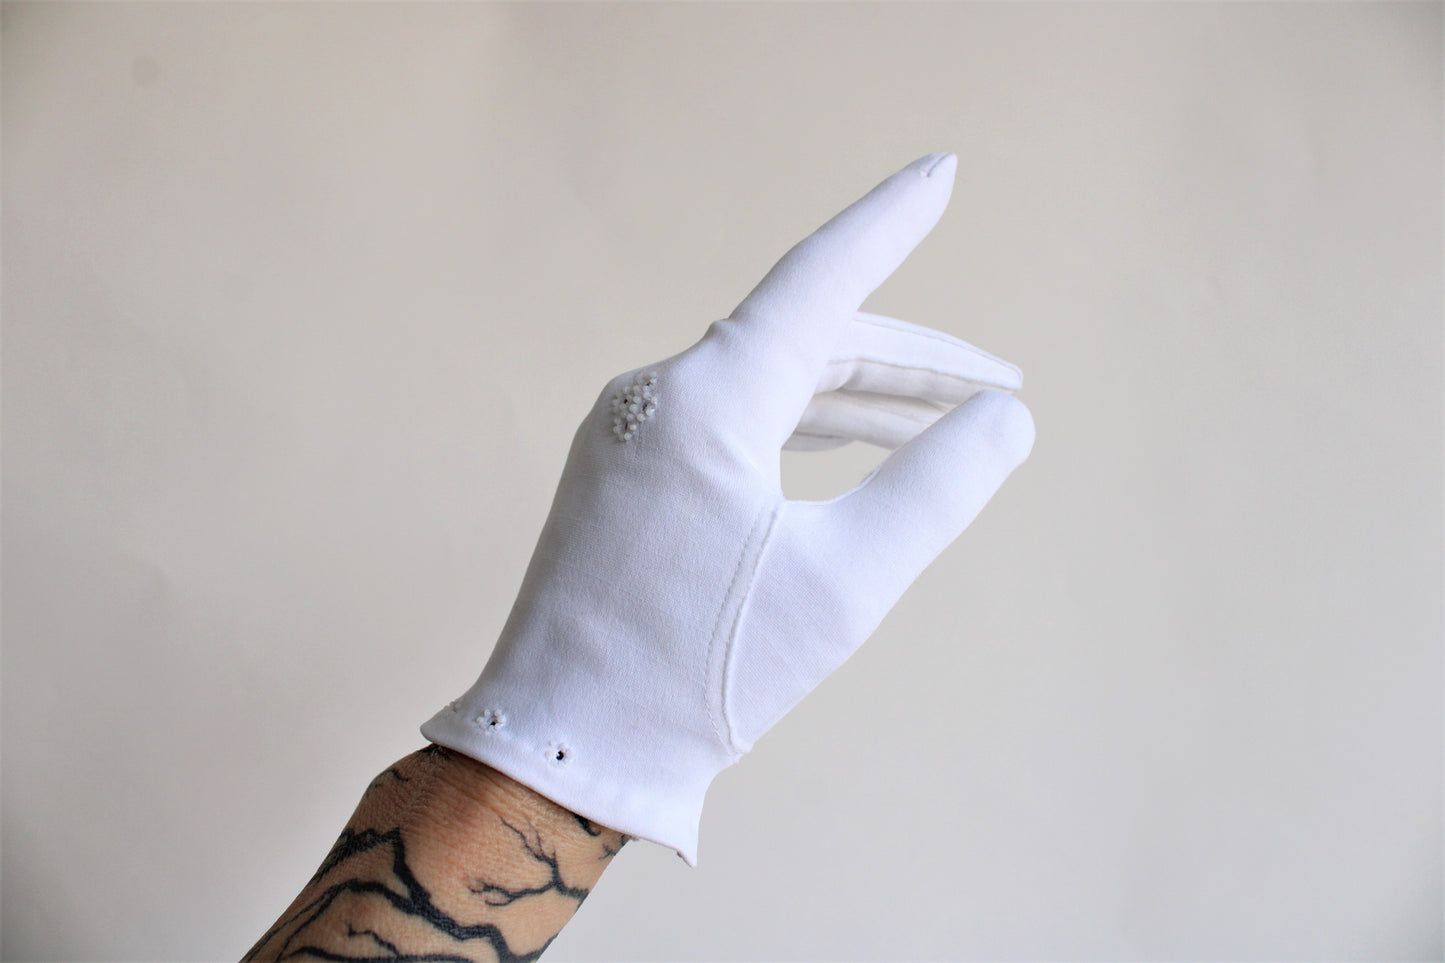 Vintage 1950s White Cotton Embroidered Gloves